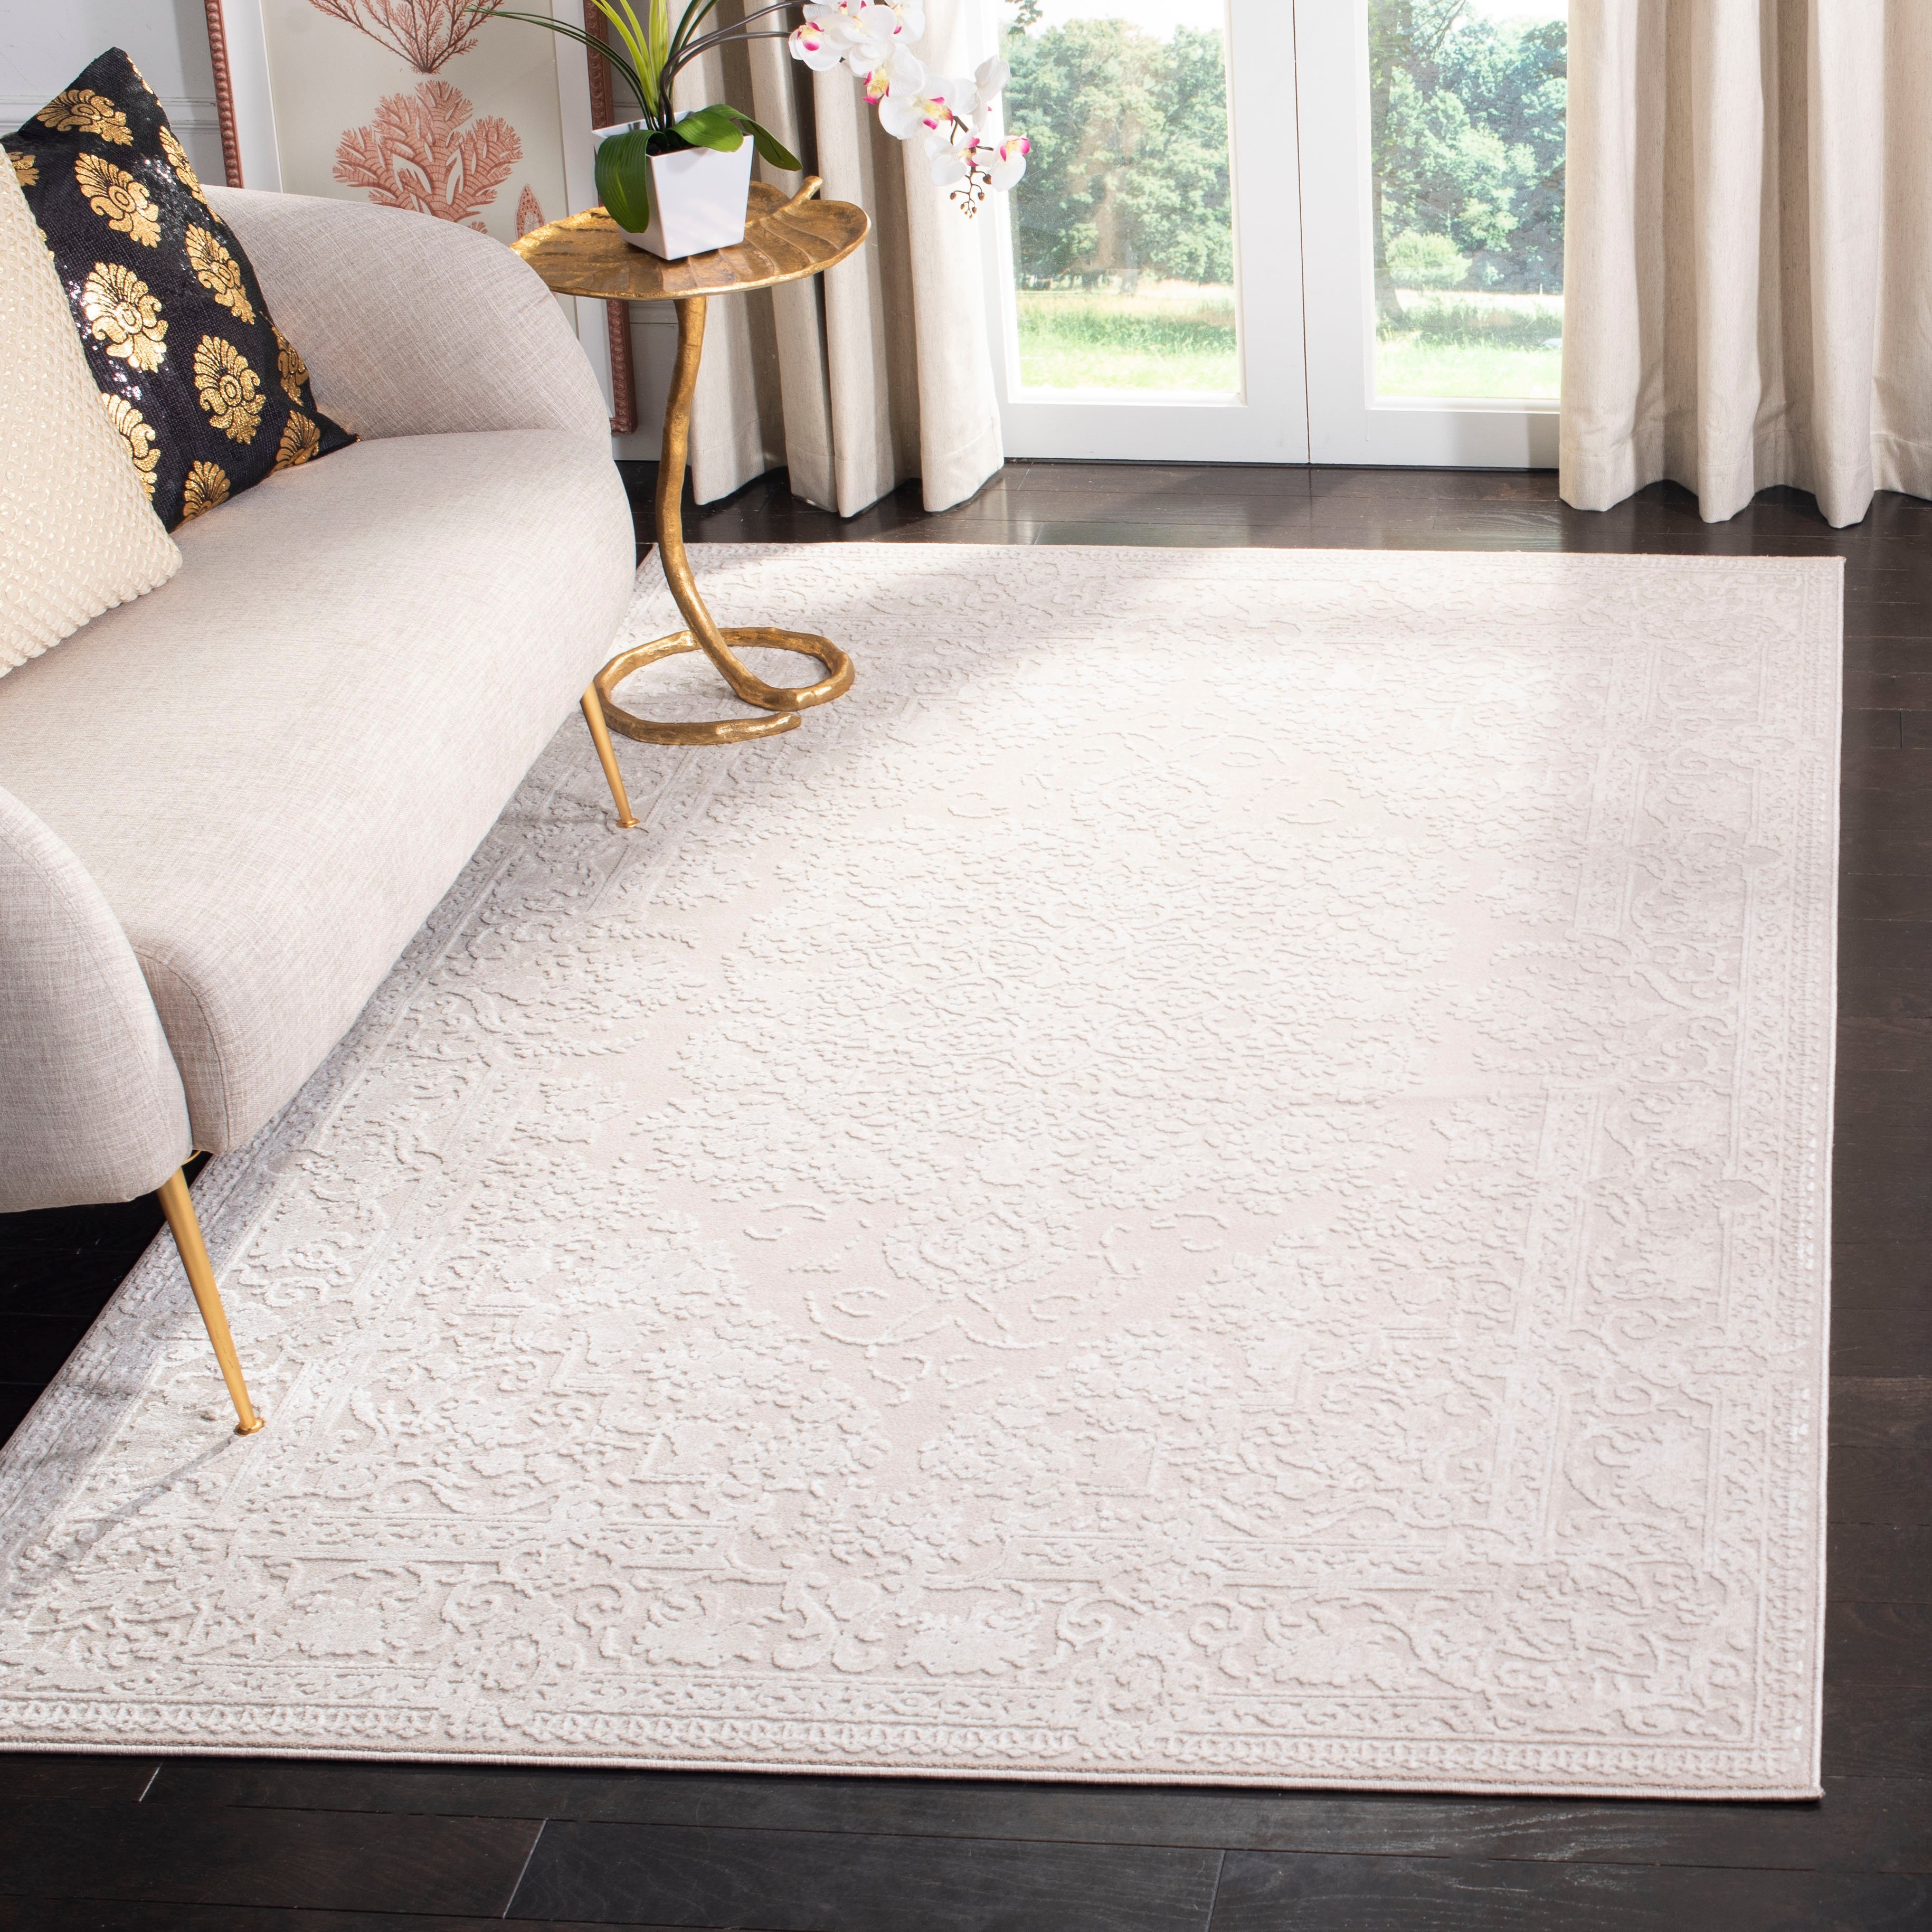 Arlo Home Woven Area Rug, RFT664D, Cream/Ivory,  6' X 9' - Image 1